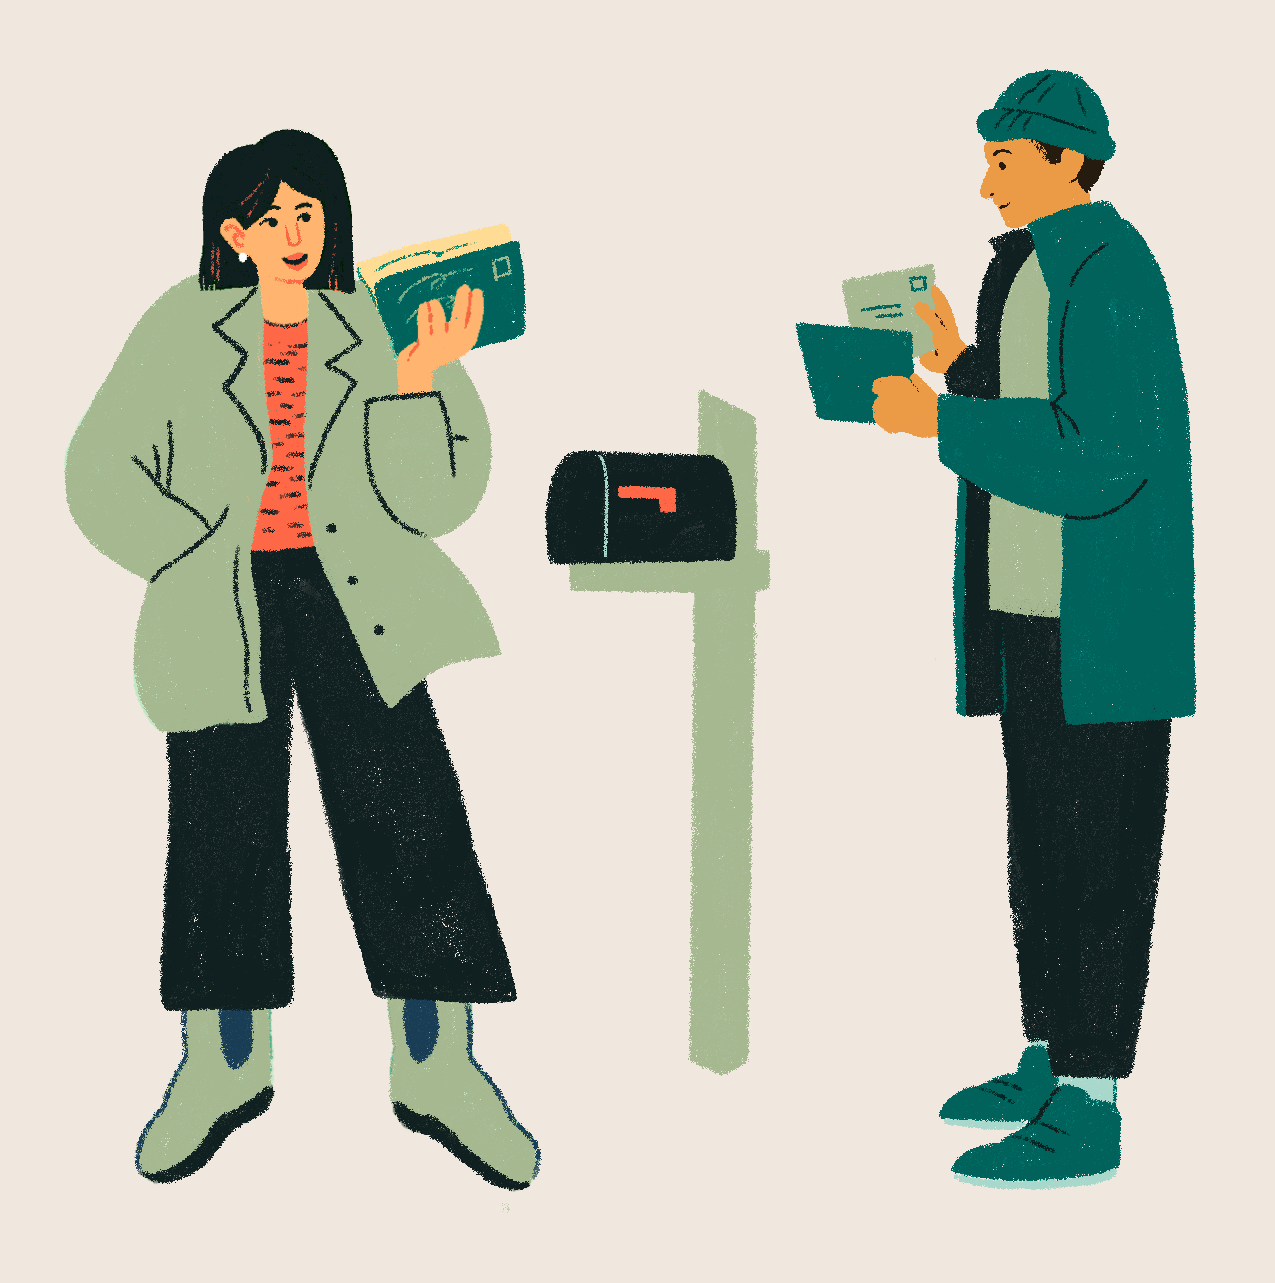 SLM's illustration of two people receiving mail